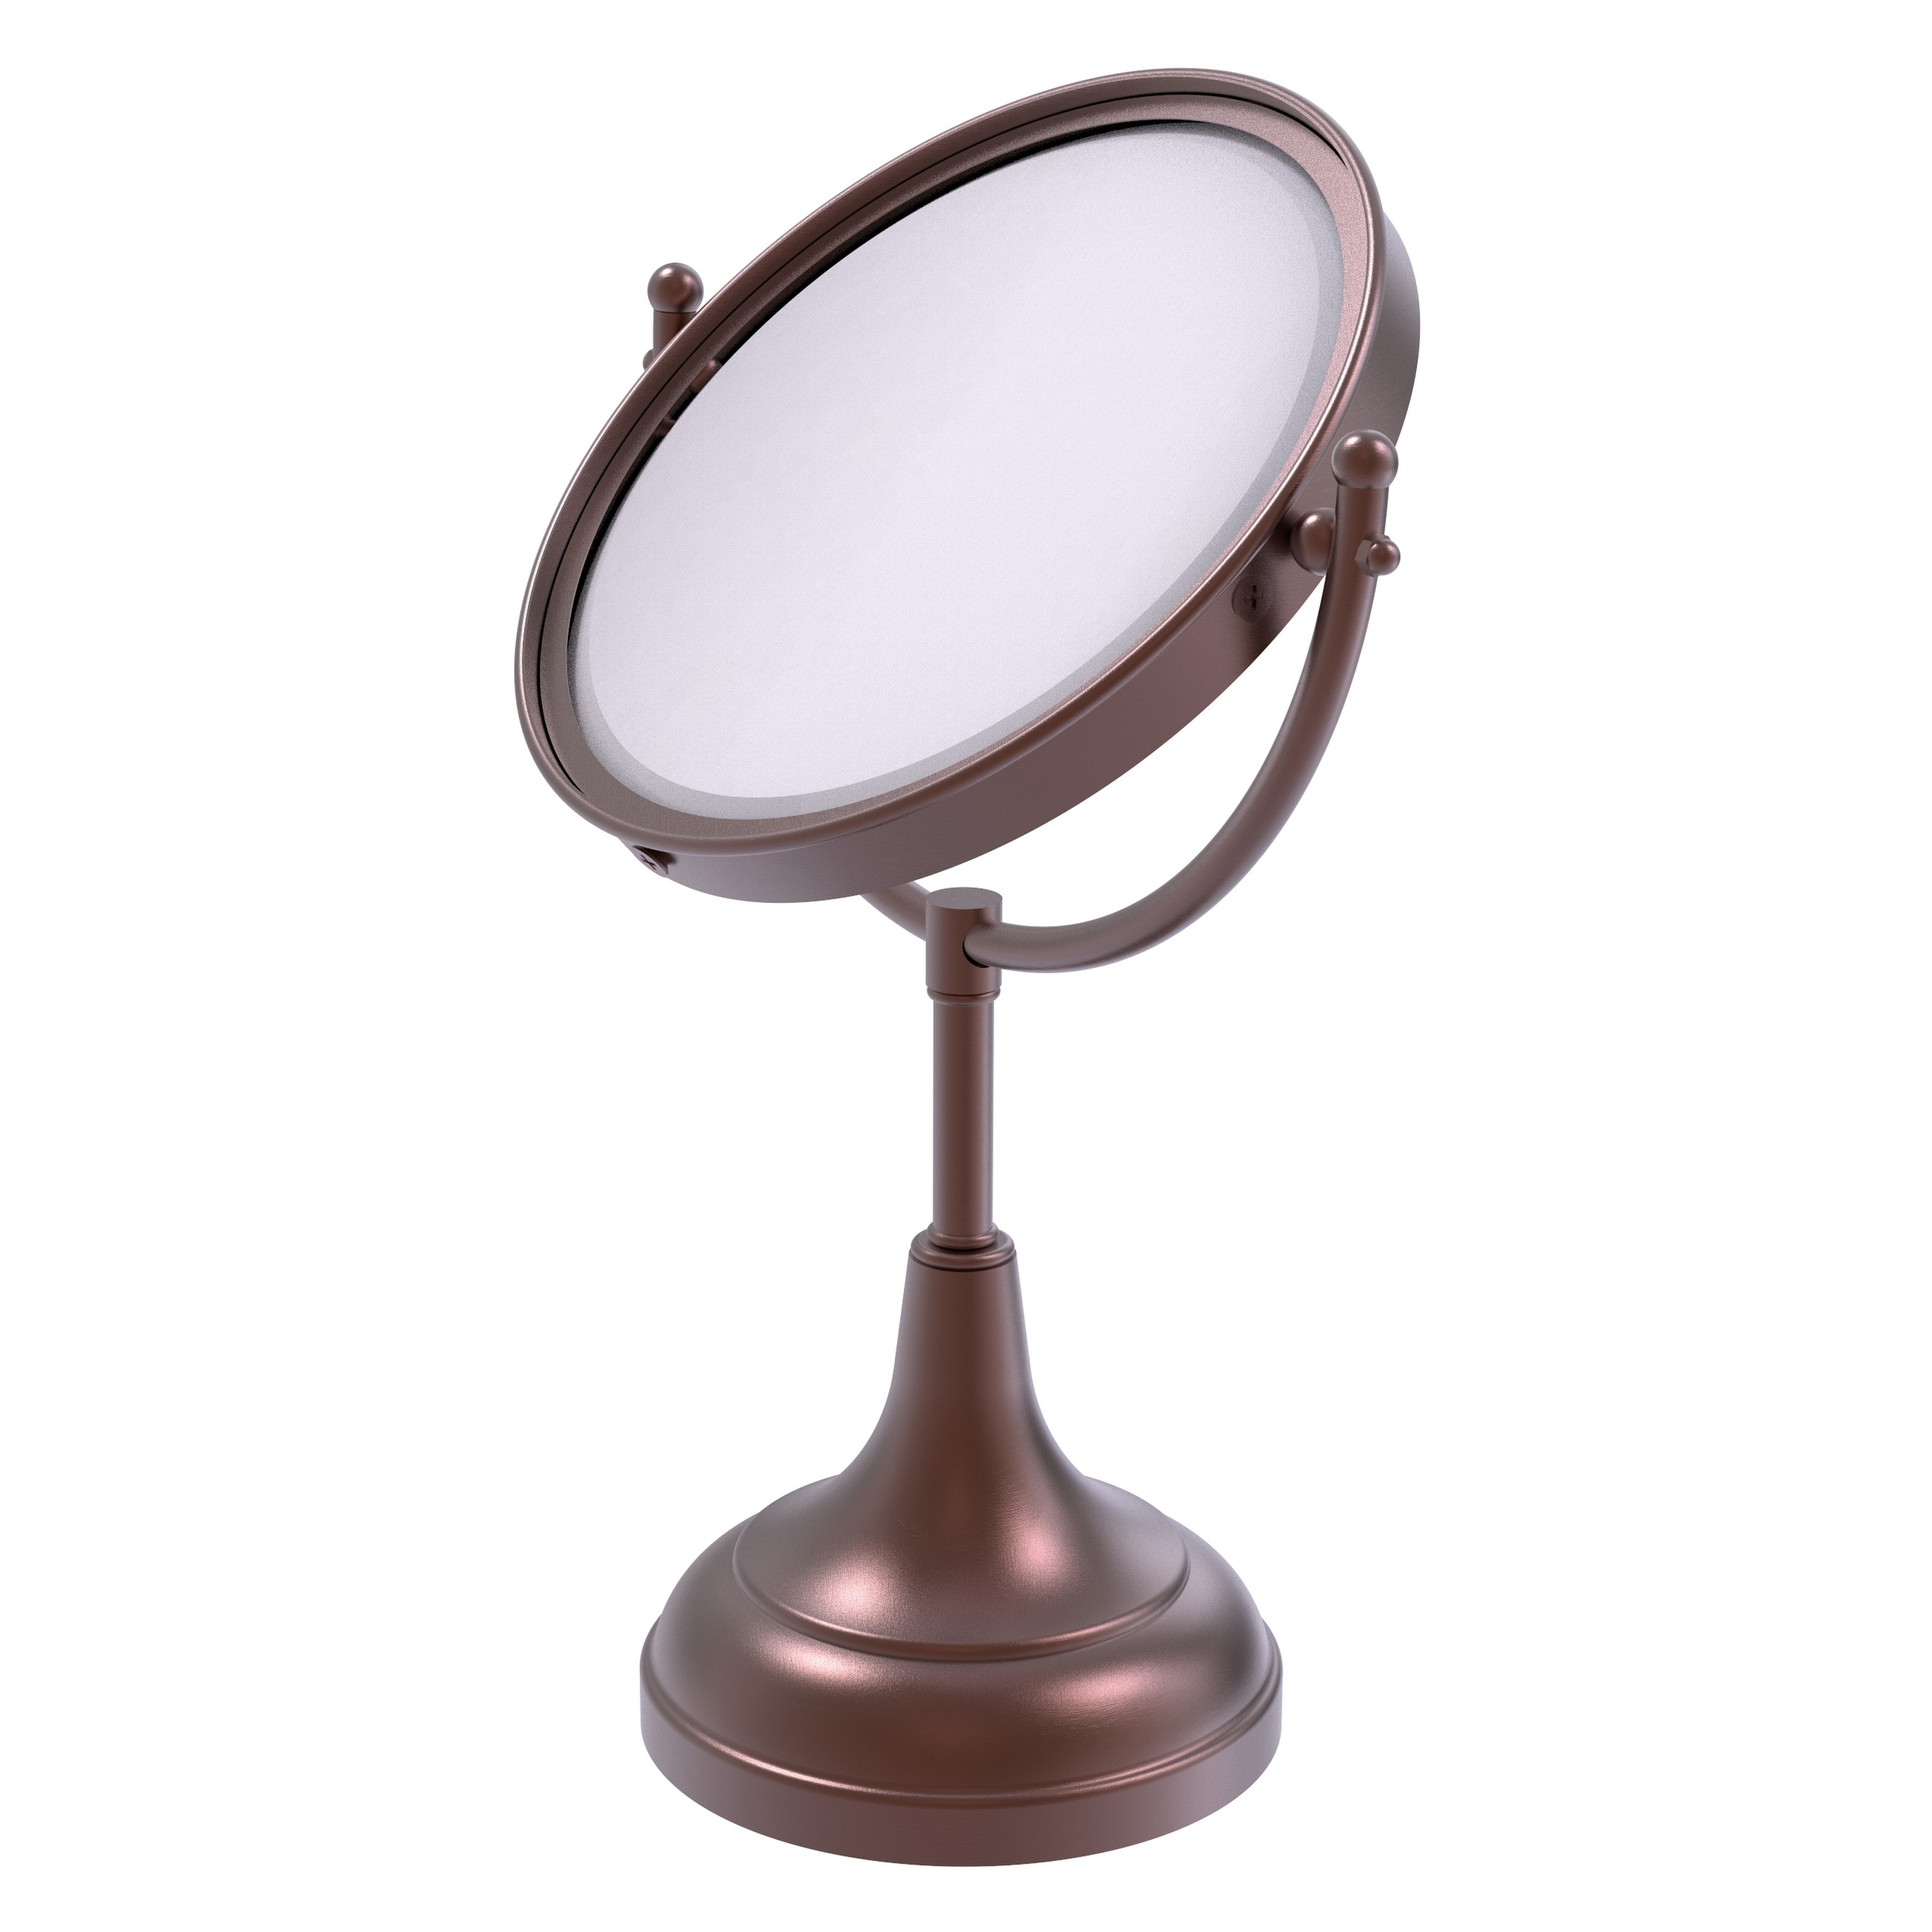 8-in x 15-in Antique Copper Double-sided 3X Magnifying Countertop Vanity Mirror | - Allied Brass DM-2/3X-CA